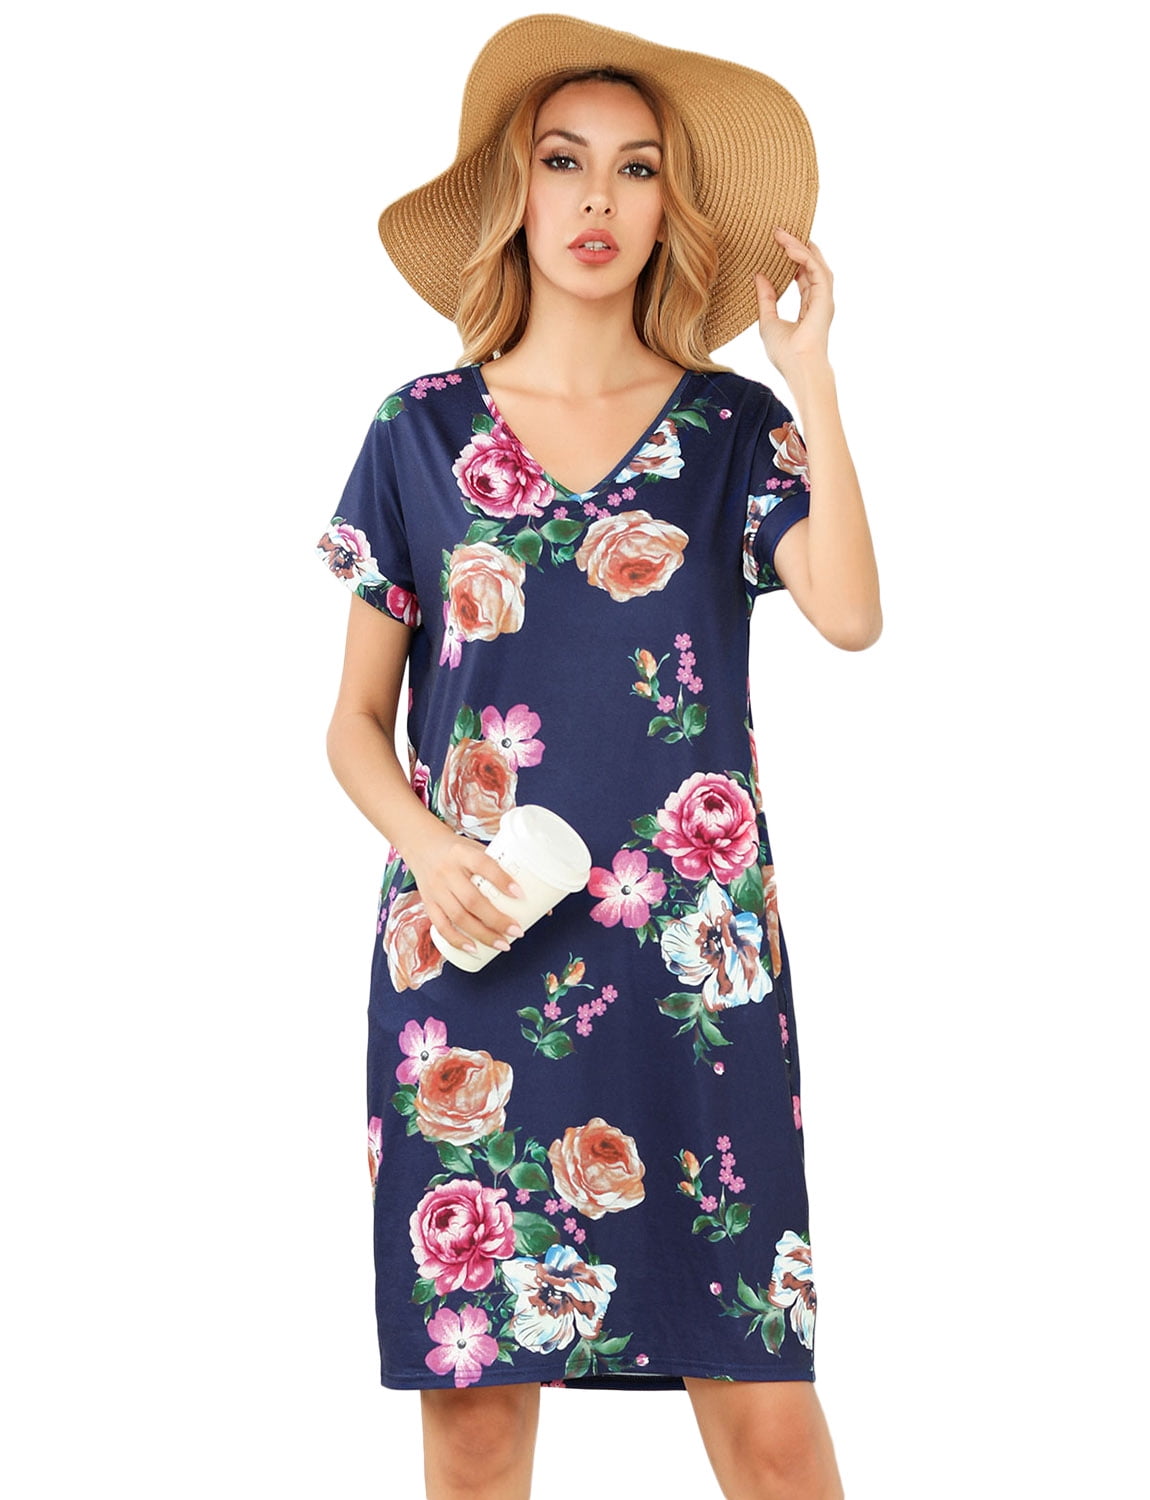 TOP SHE - Women's Summer Casual T Shirt Dresses Floral Printed T Shirt ...